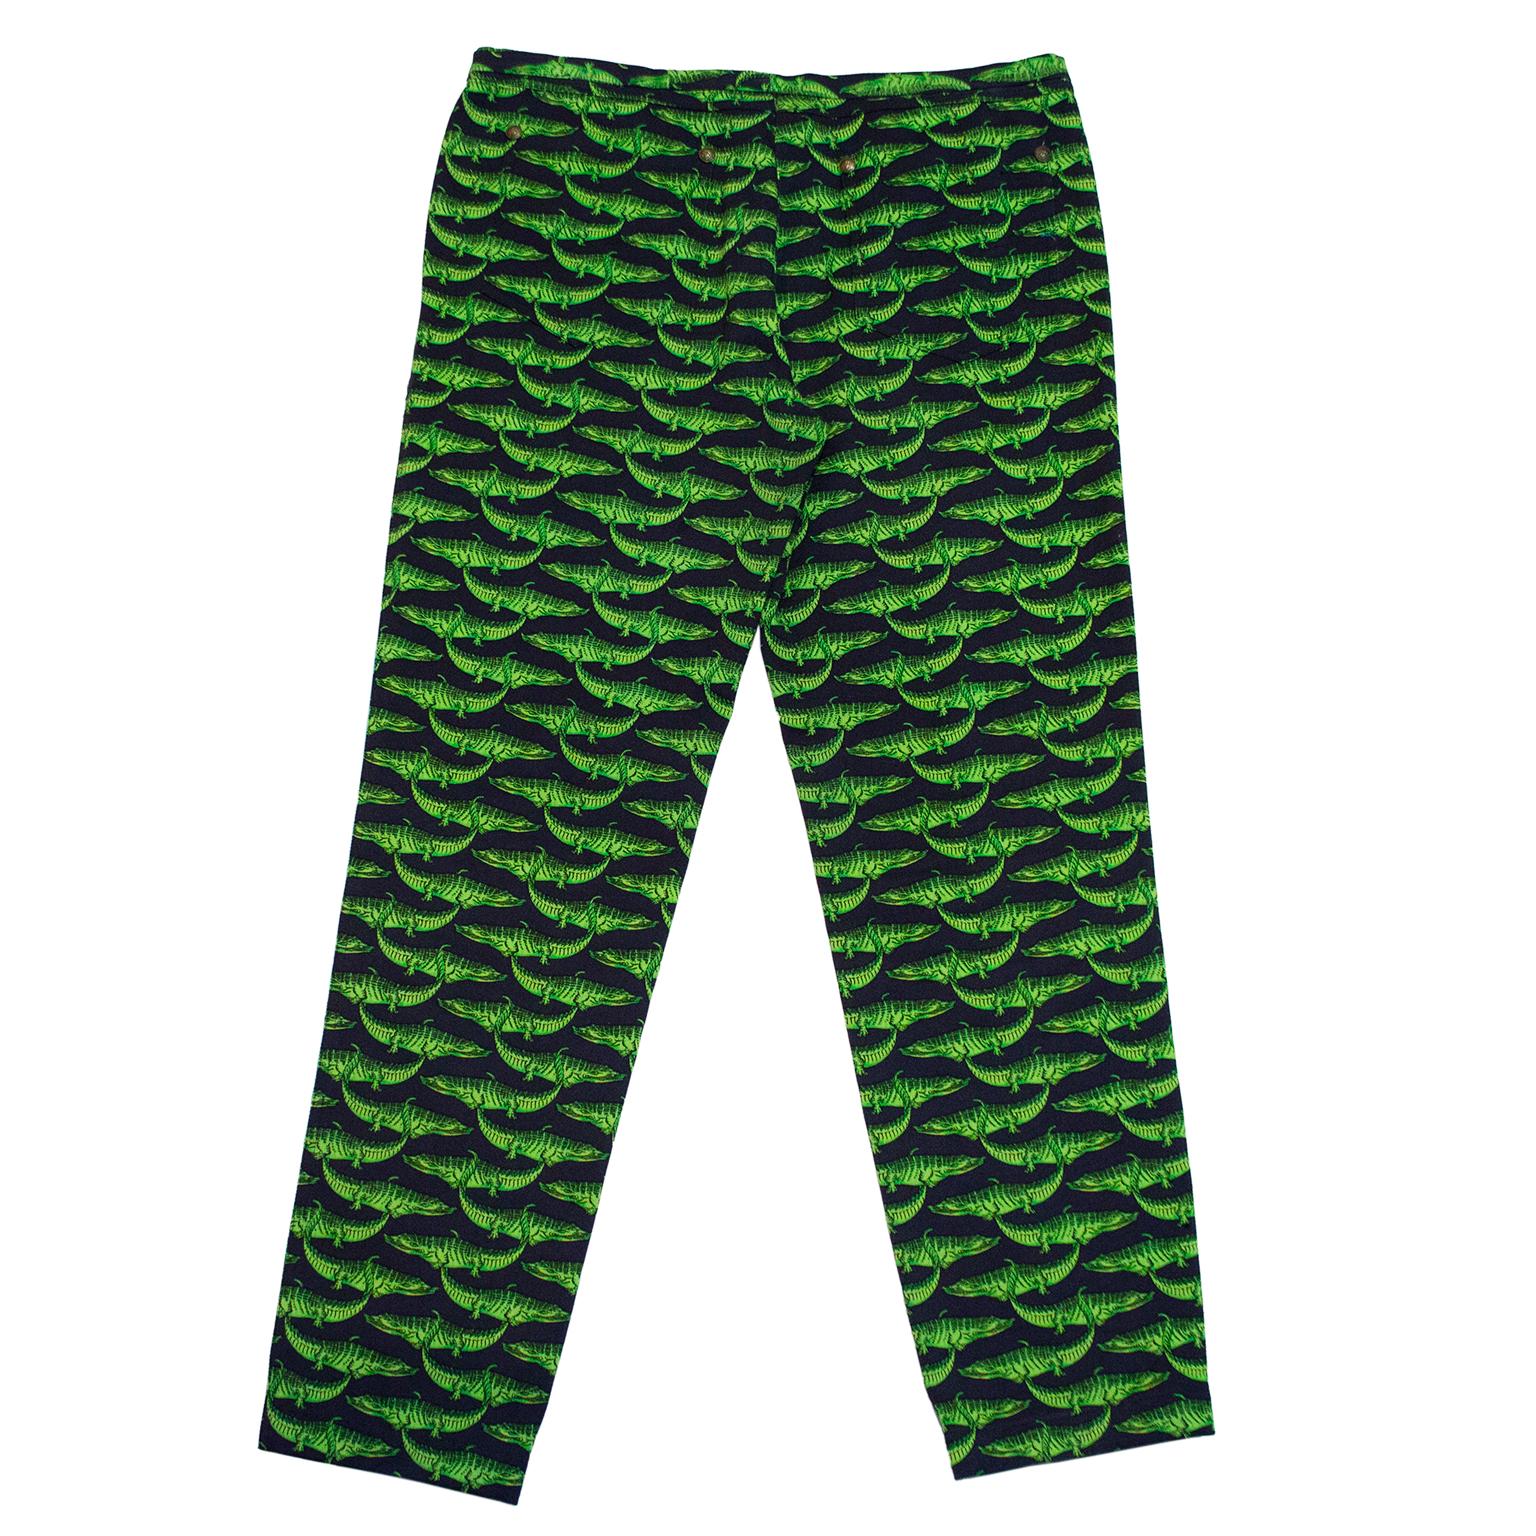 1990s Versace jeans. Black with an all over green alligator print. left leg is further detailed with contrasting blue  and tropical palms trees. Pattern is a tribute to Miami with the alligators and palm trees, where the Versace Mansion is located.